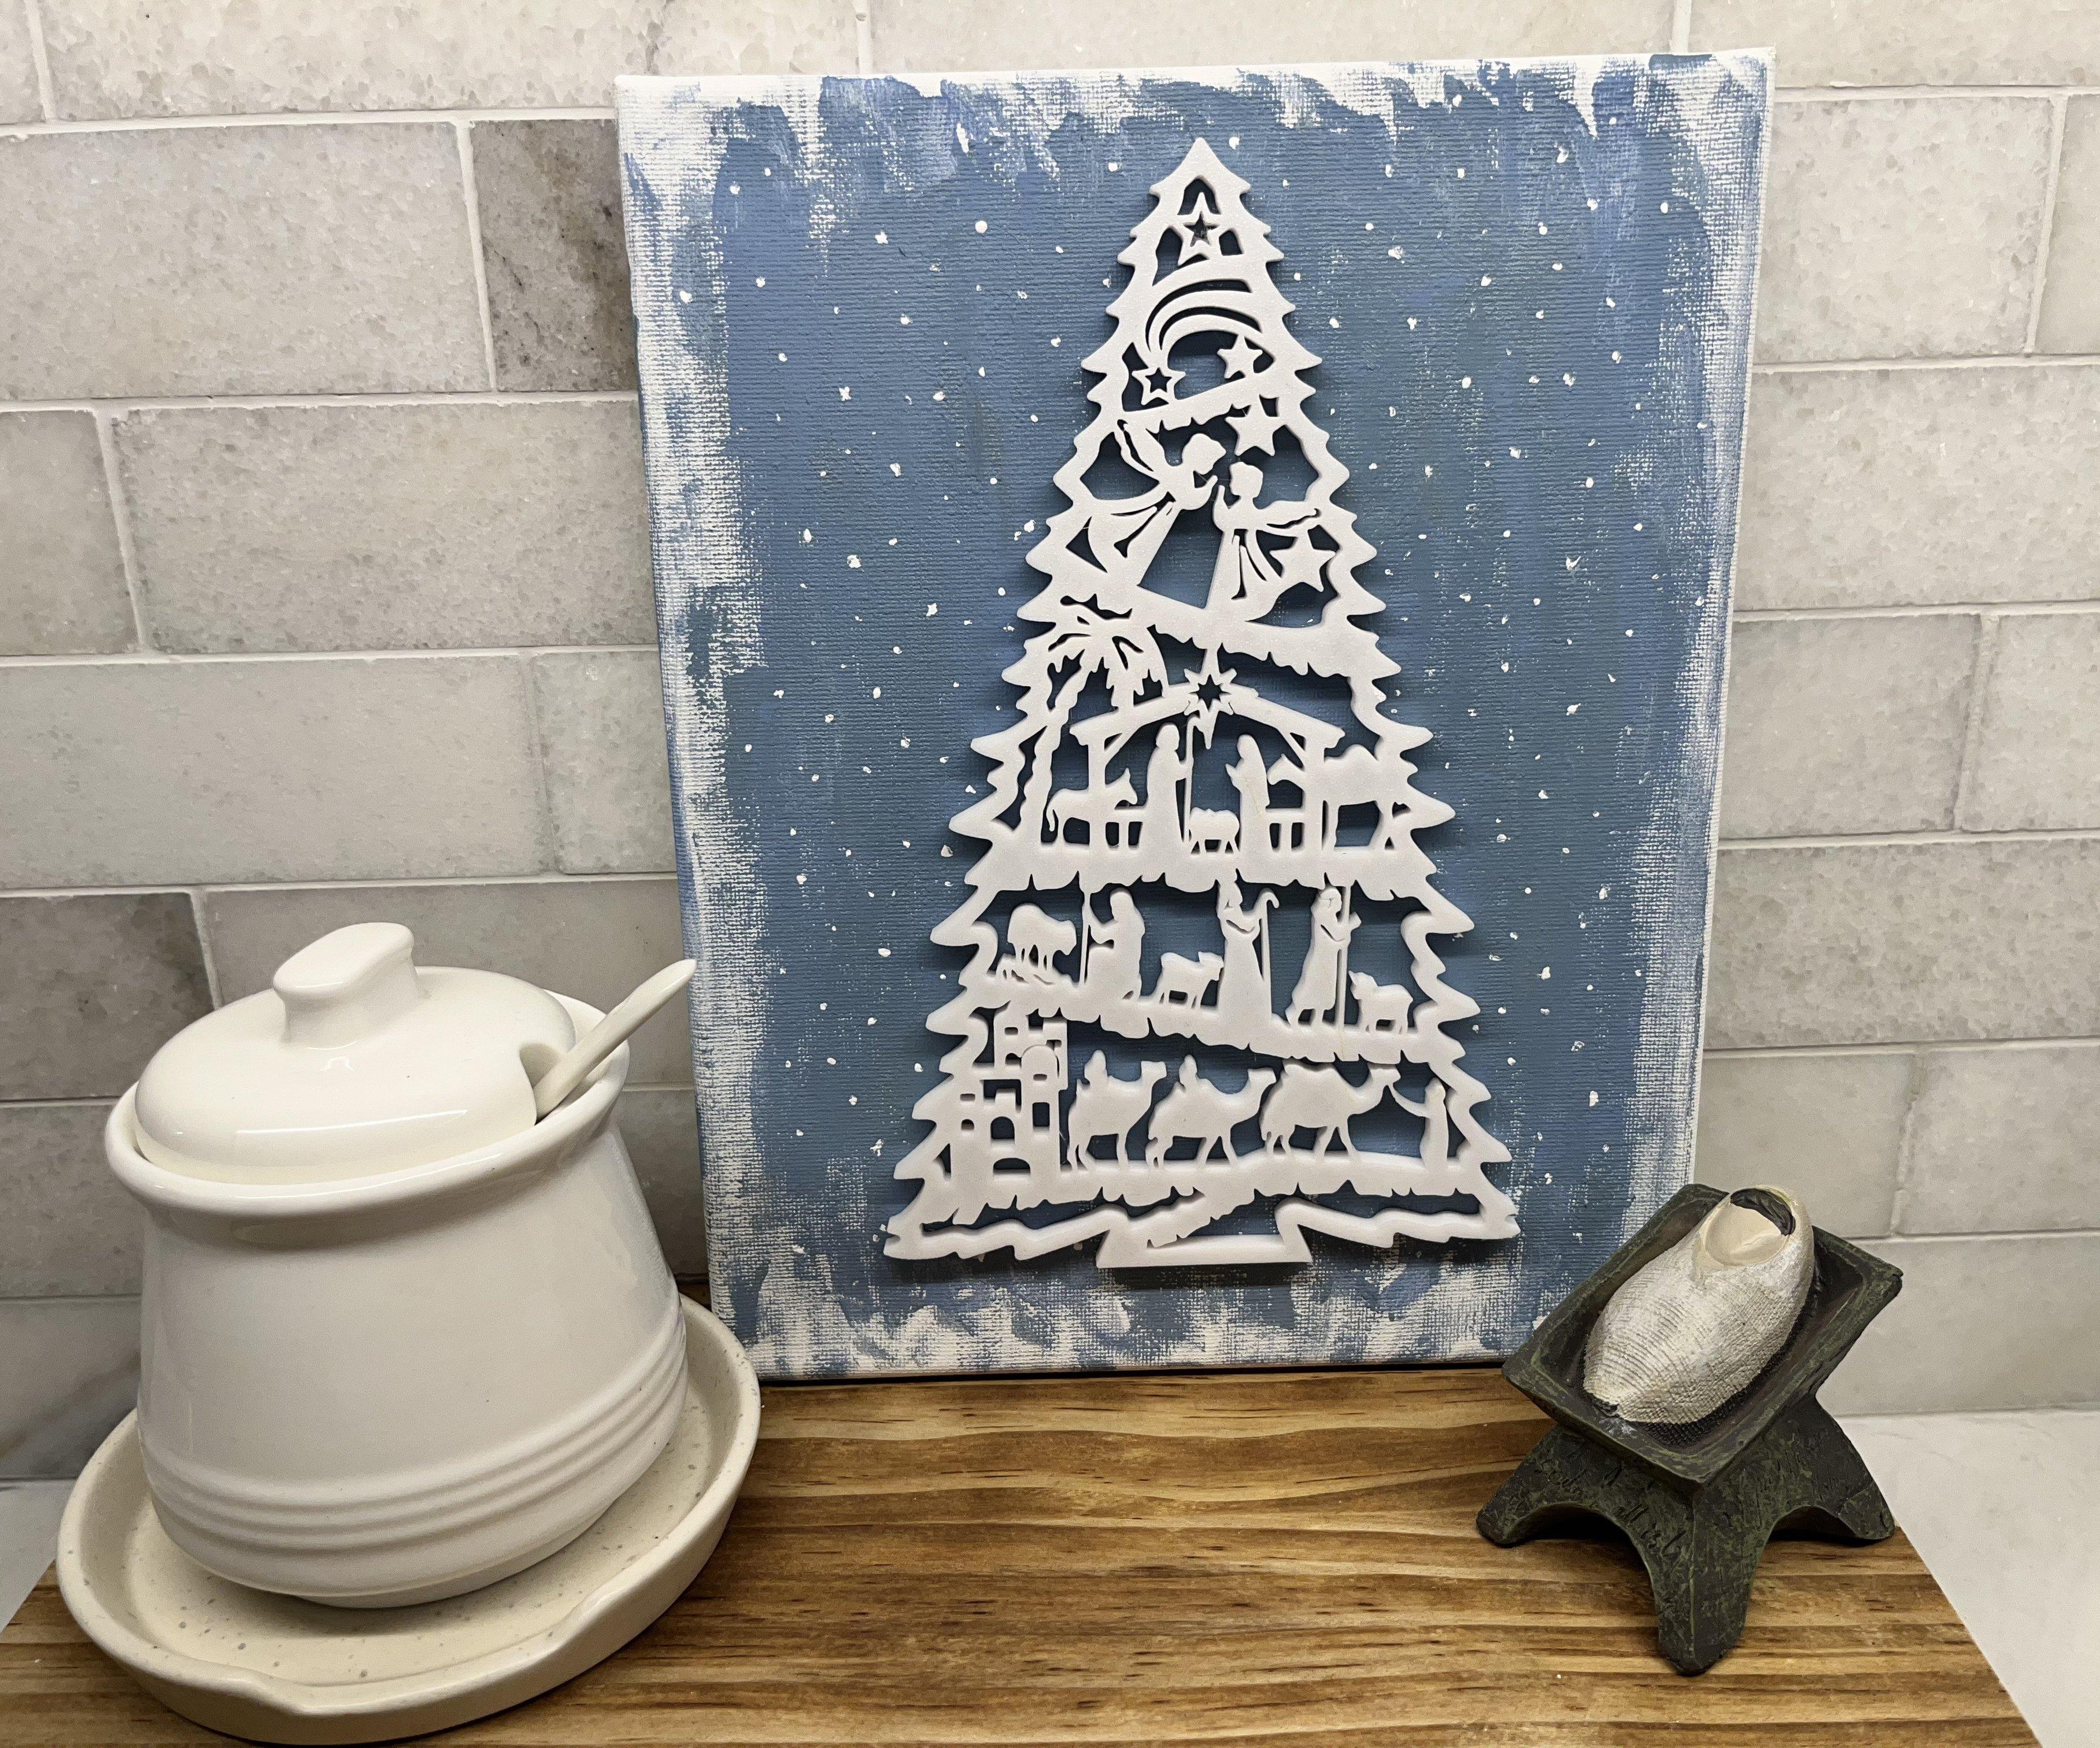 Nativity Scene Tree on Canvas - Attaches With Magnets!